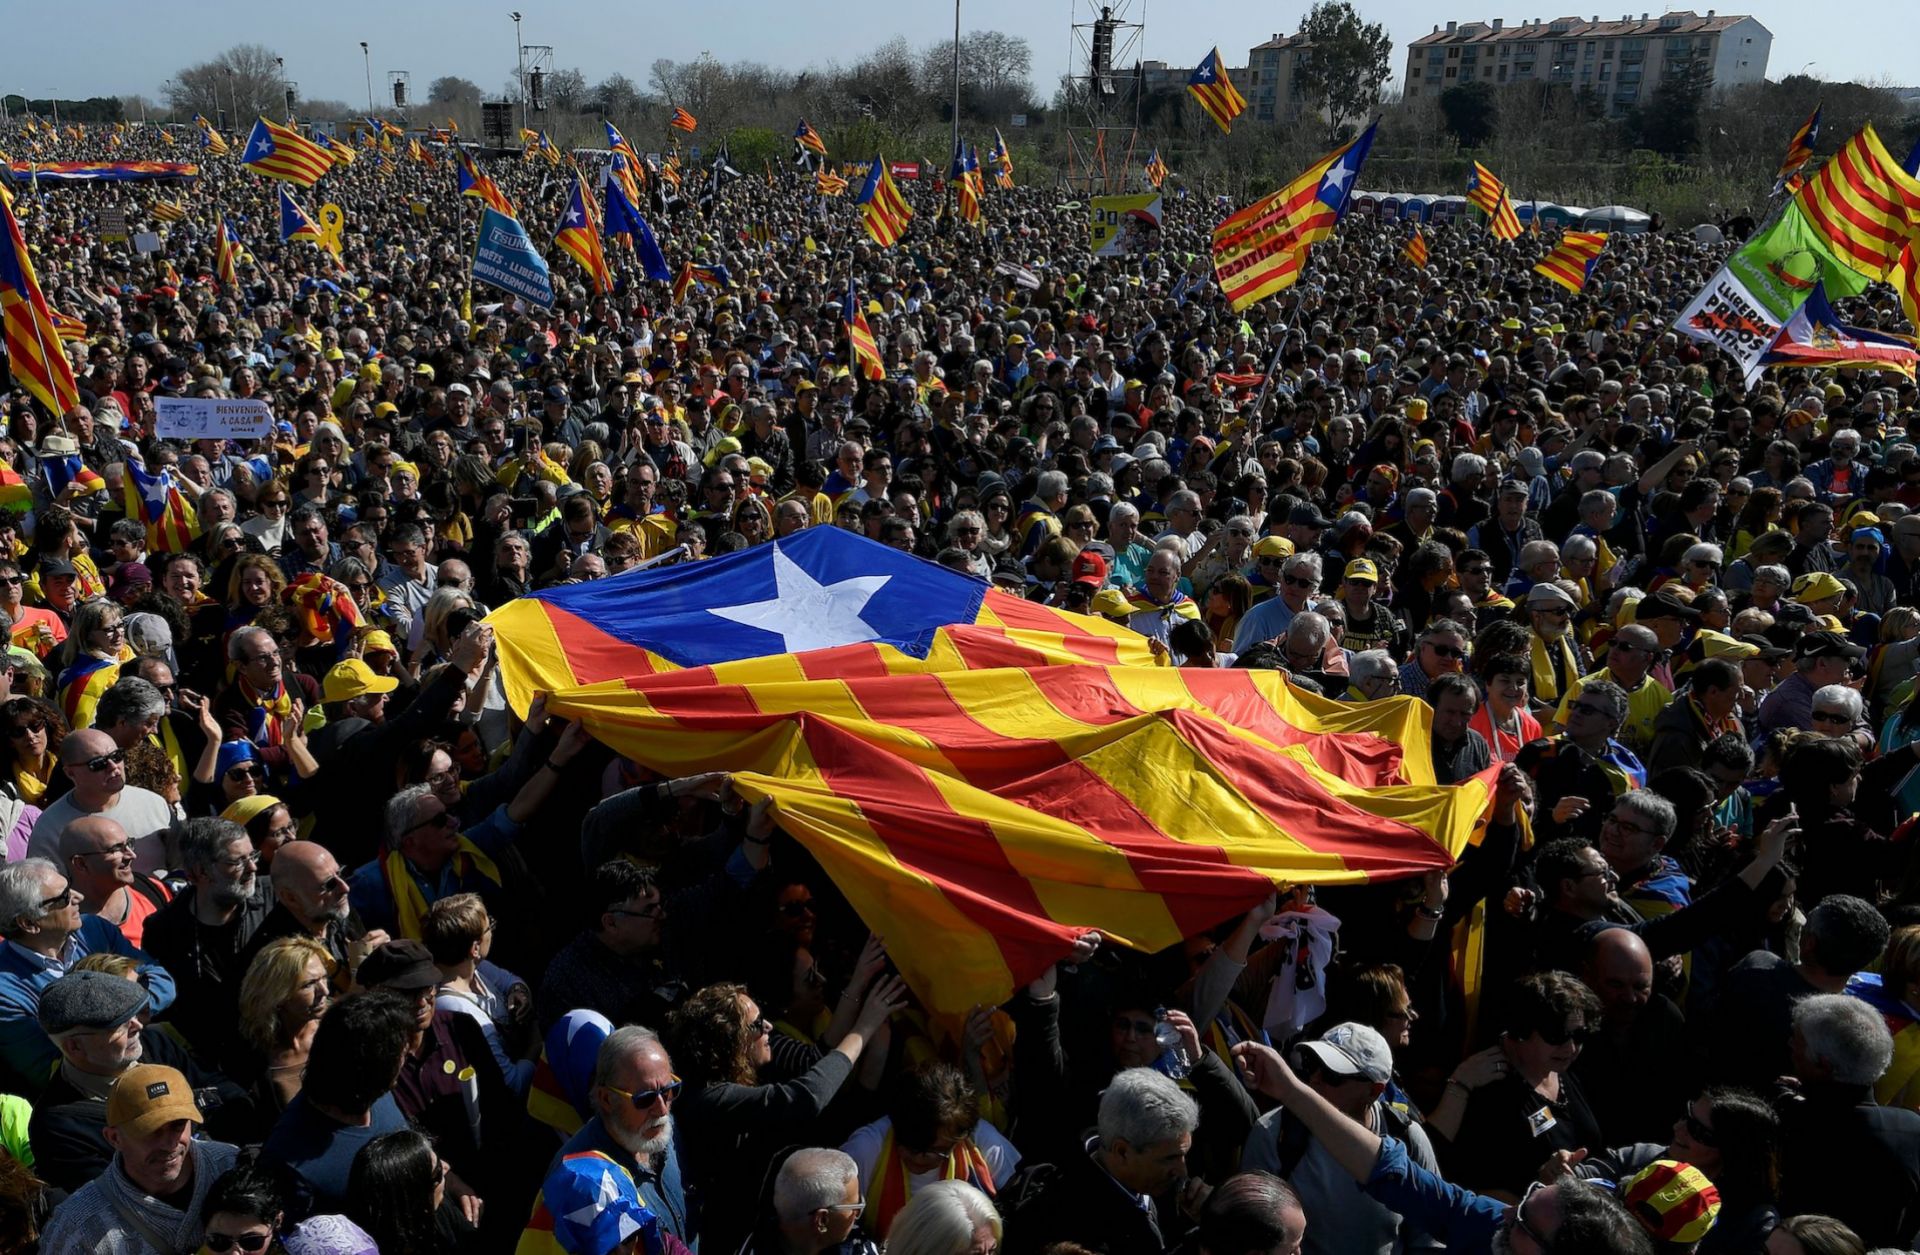 Demonstrators hold a Catalonian flag ahead of a political meeting in Perpignan, France, on Feb. 29, 2020. 